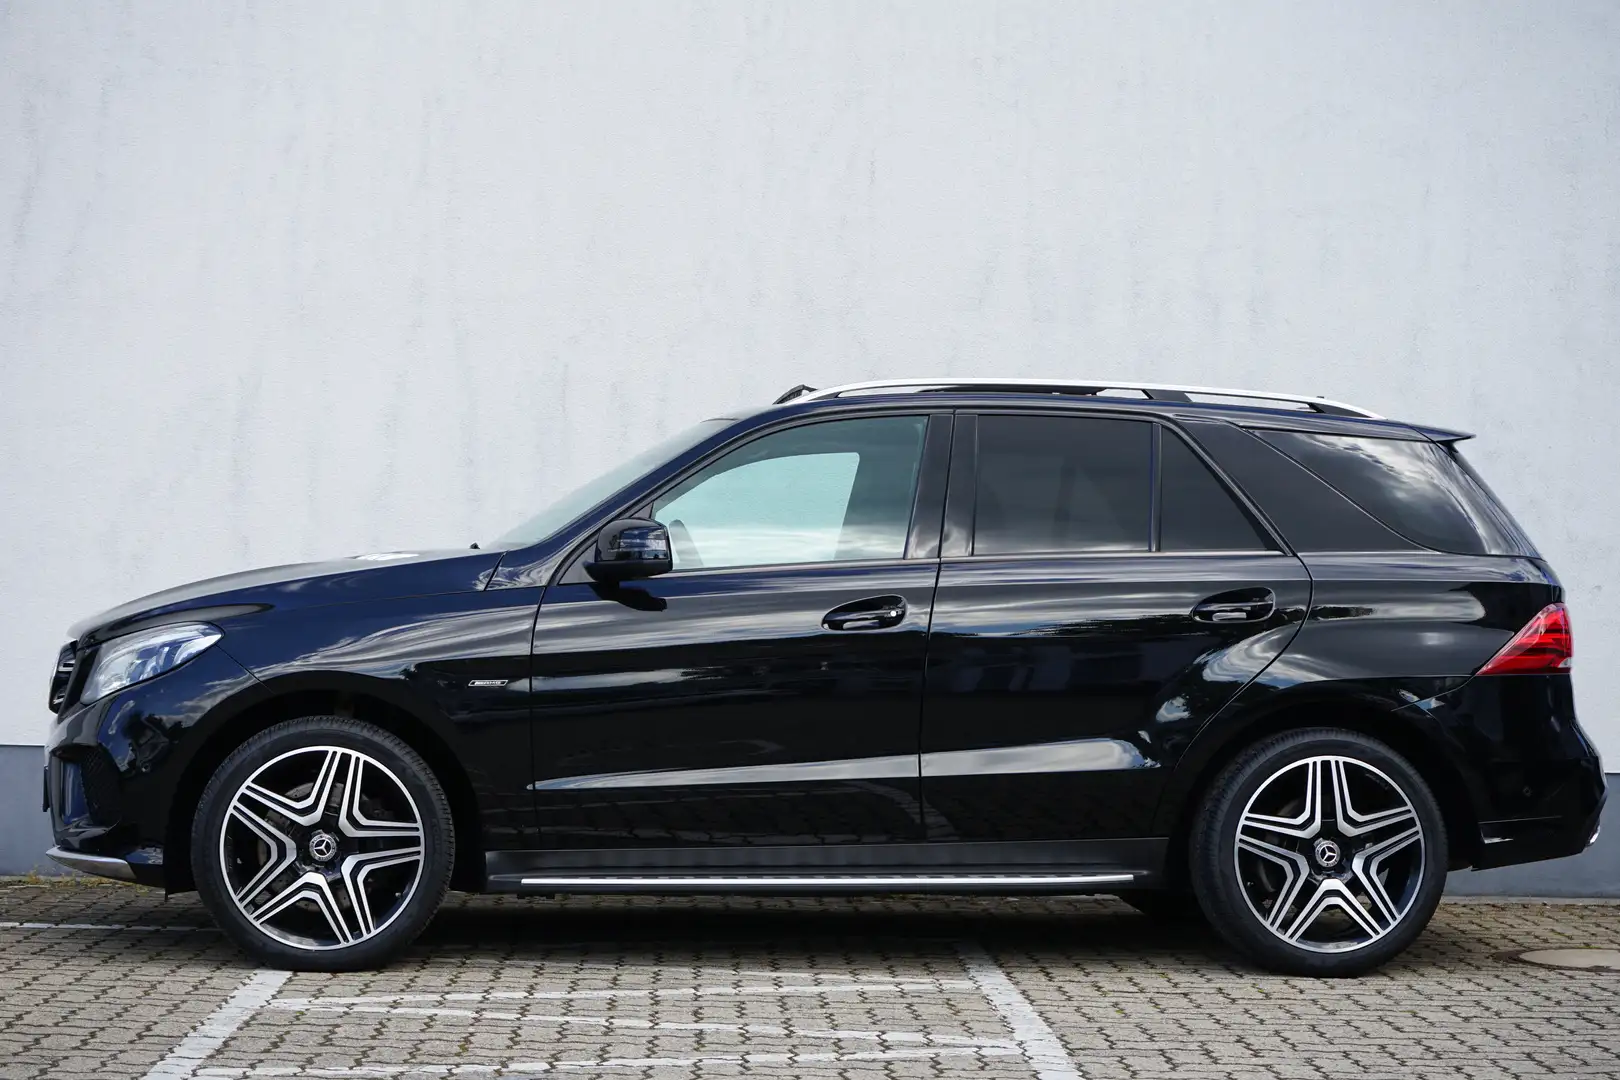 Mercedes-Benz GLE 450 4MATIC*21 Zoll*Panorama*LED ILS*Standheizung*Voll Czarny - 2